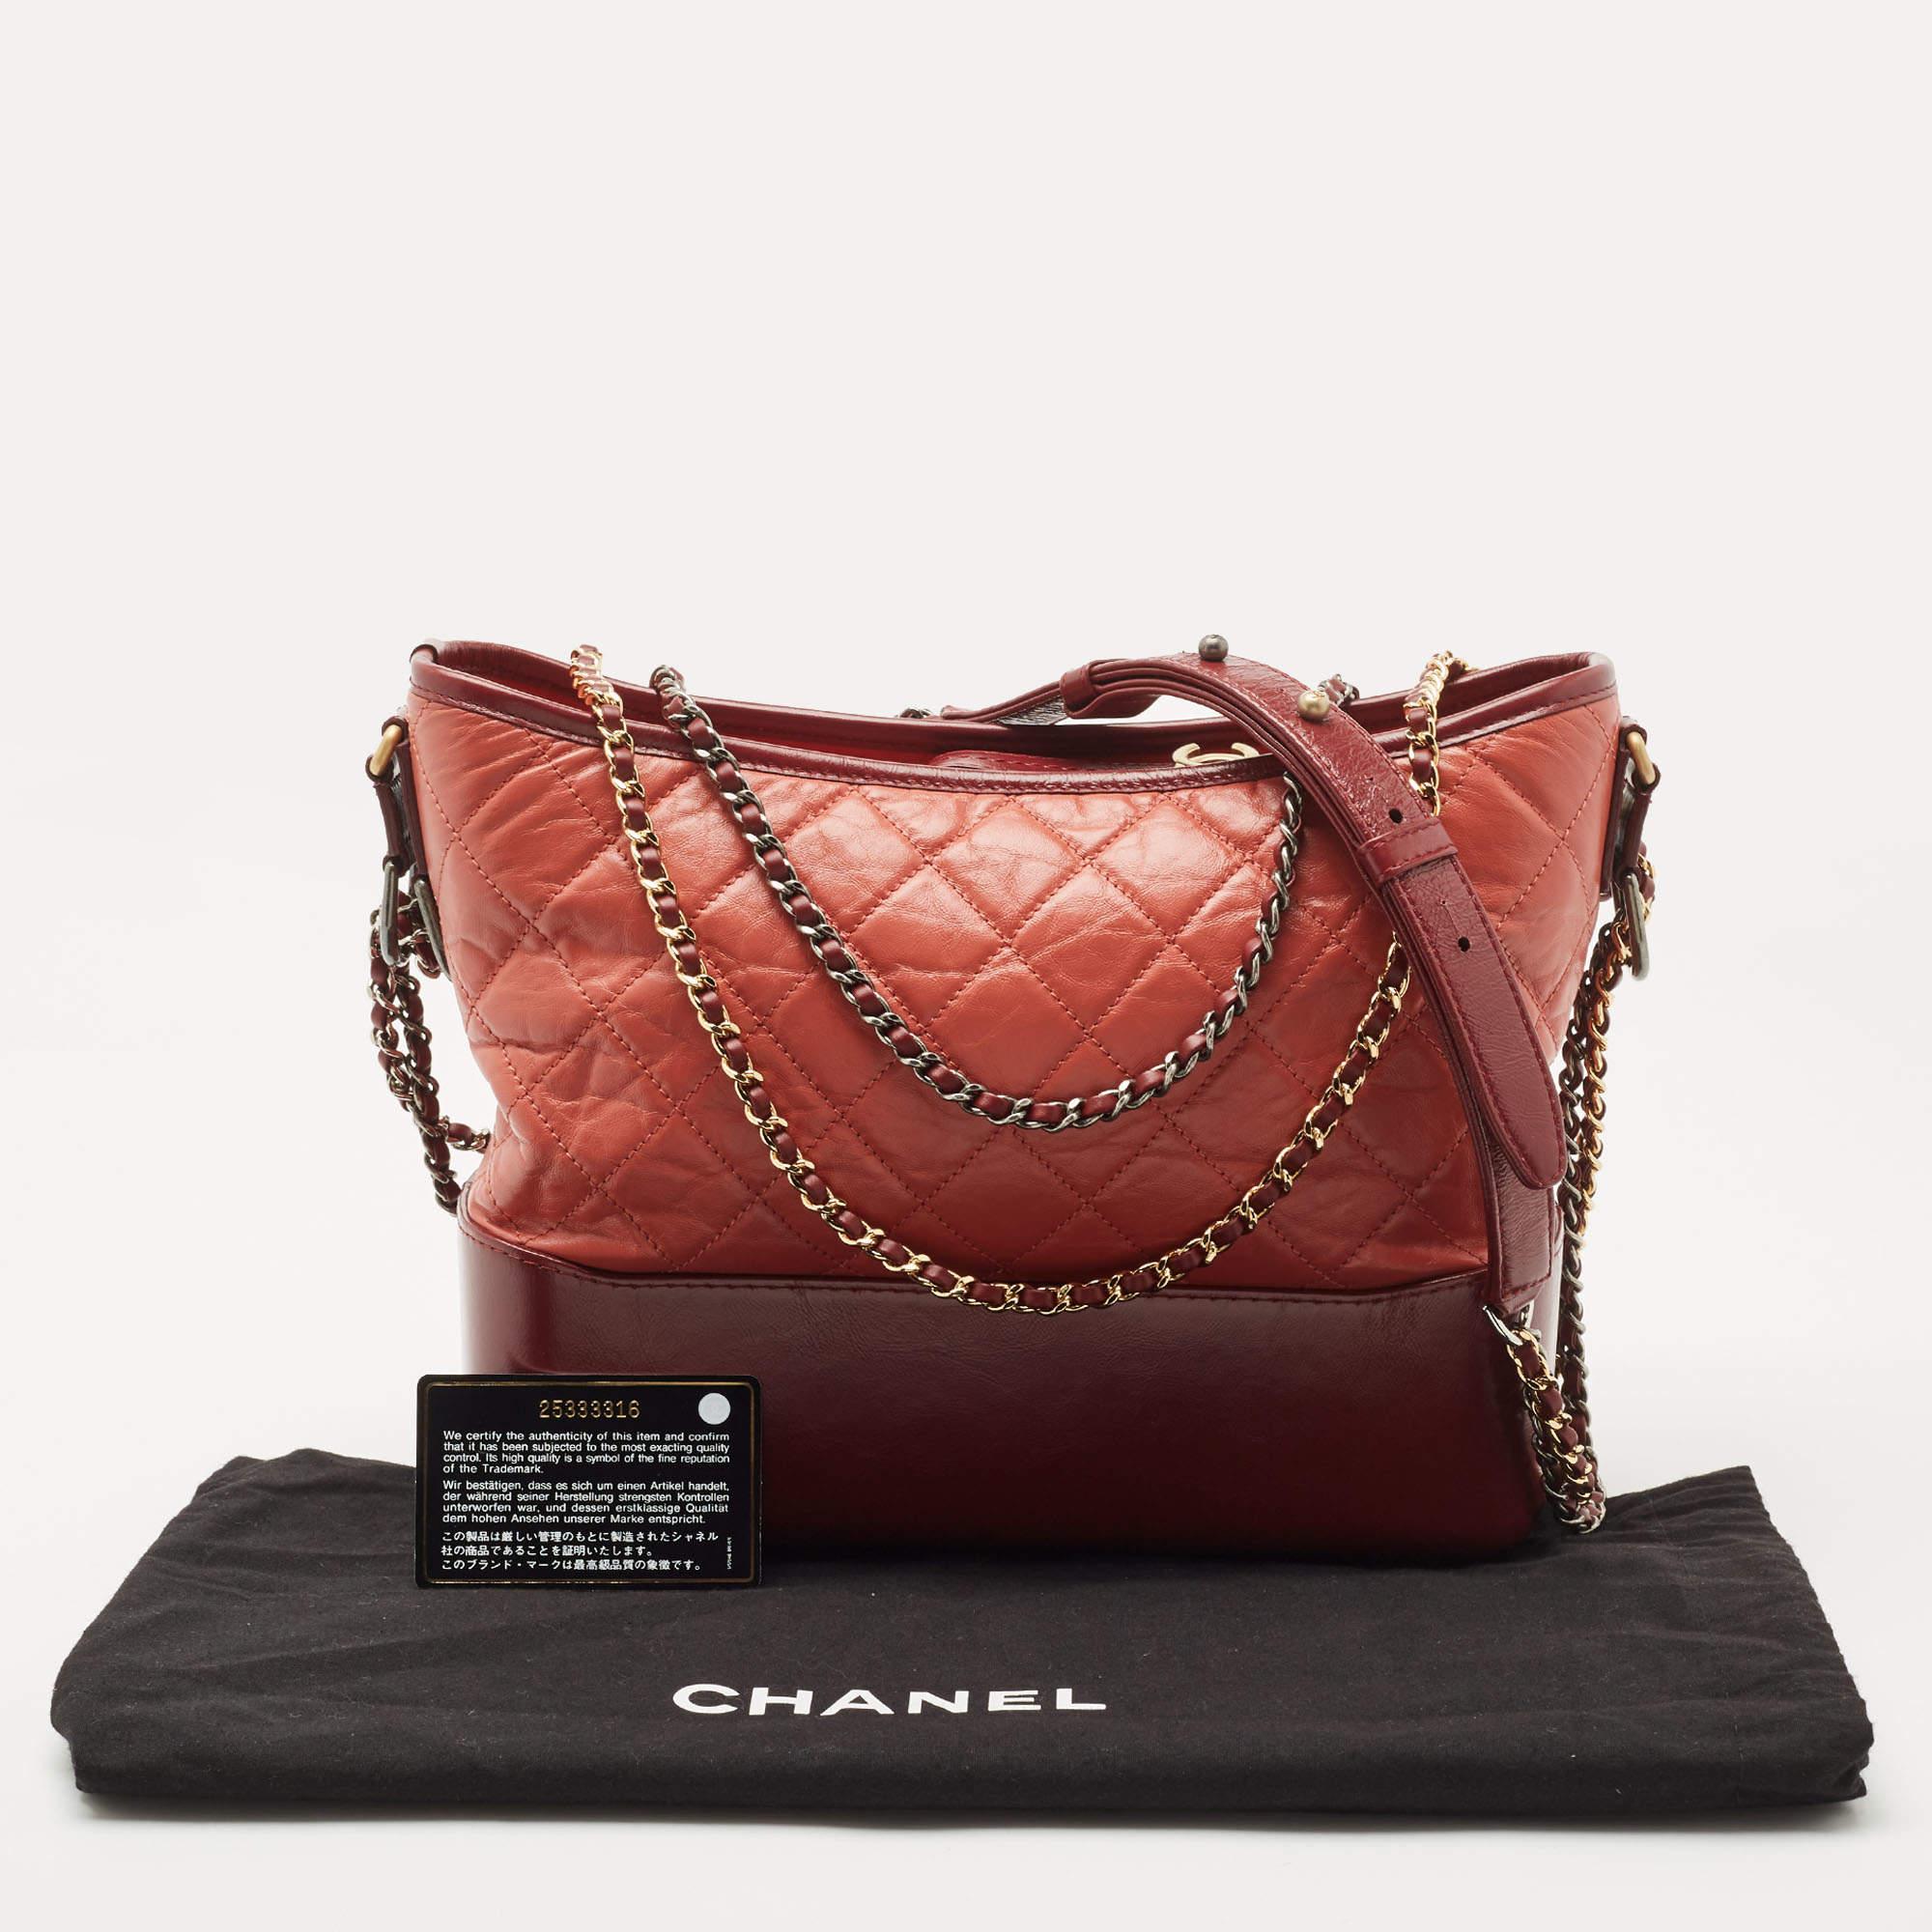 Chanel Burgundy/Orange Quilted Aged Leather Medium Gabrielle Hobo 4